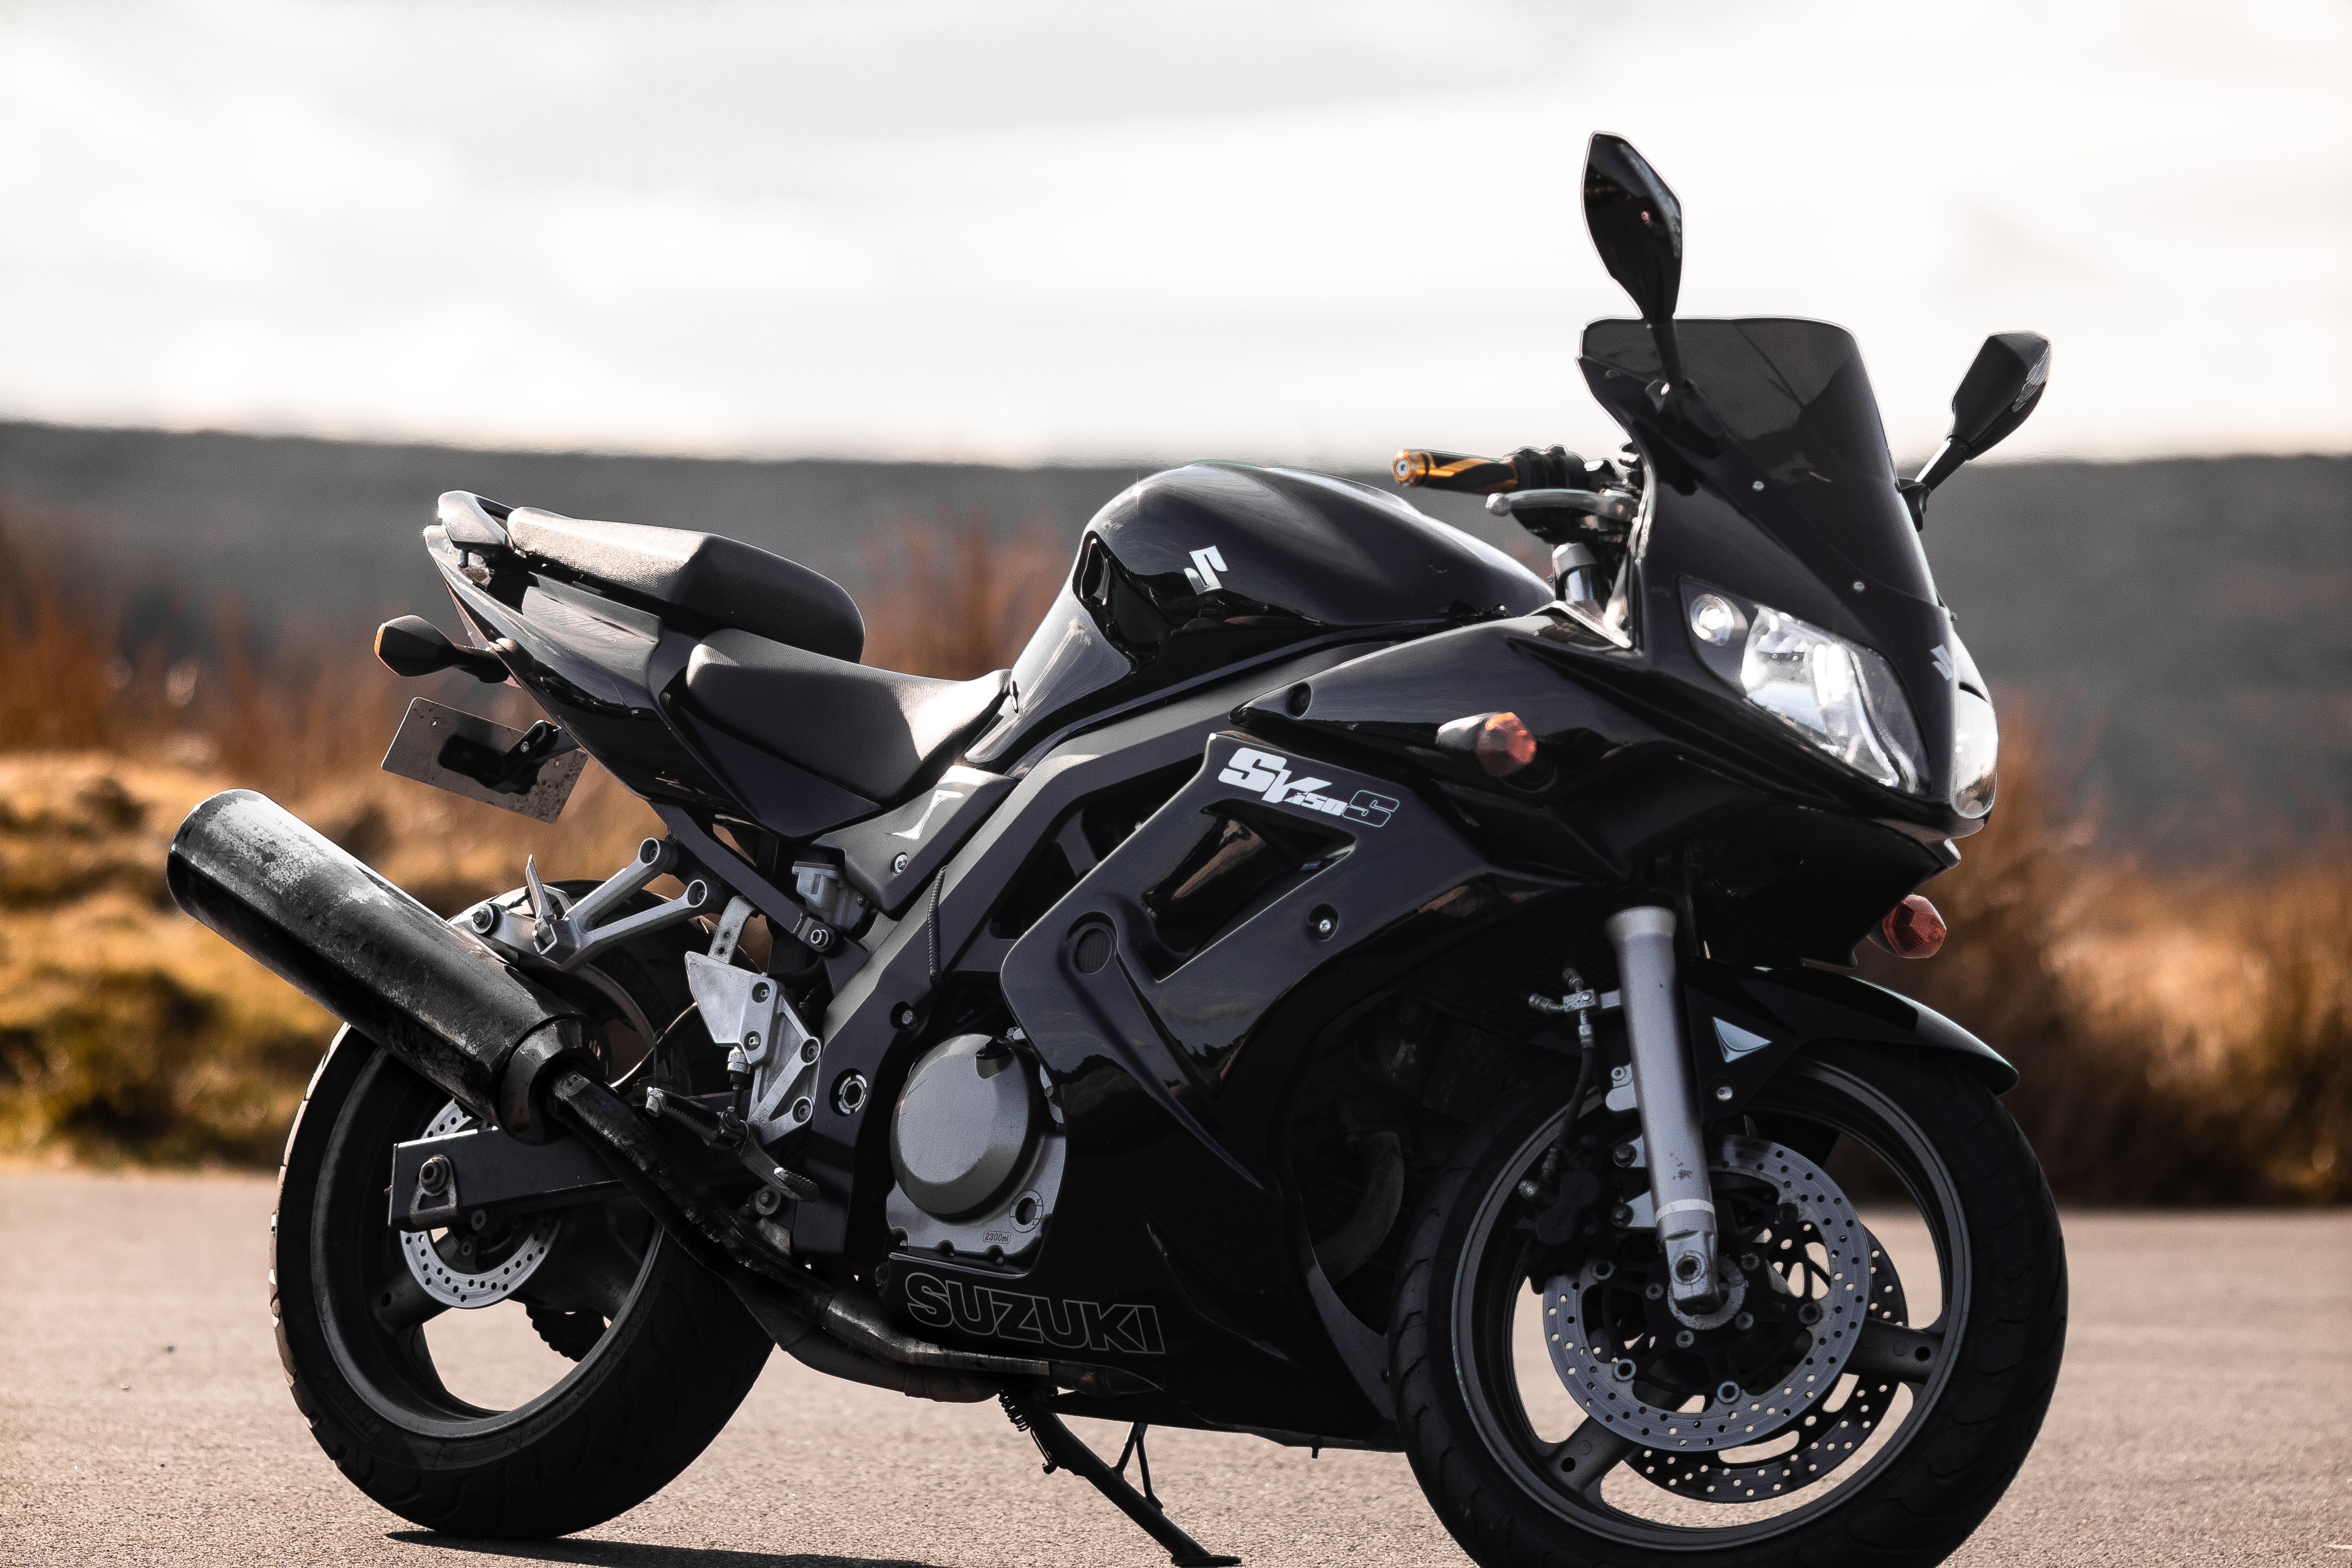 Motorbikes for Sale - Get Your New Motorbike Today